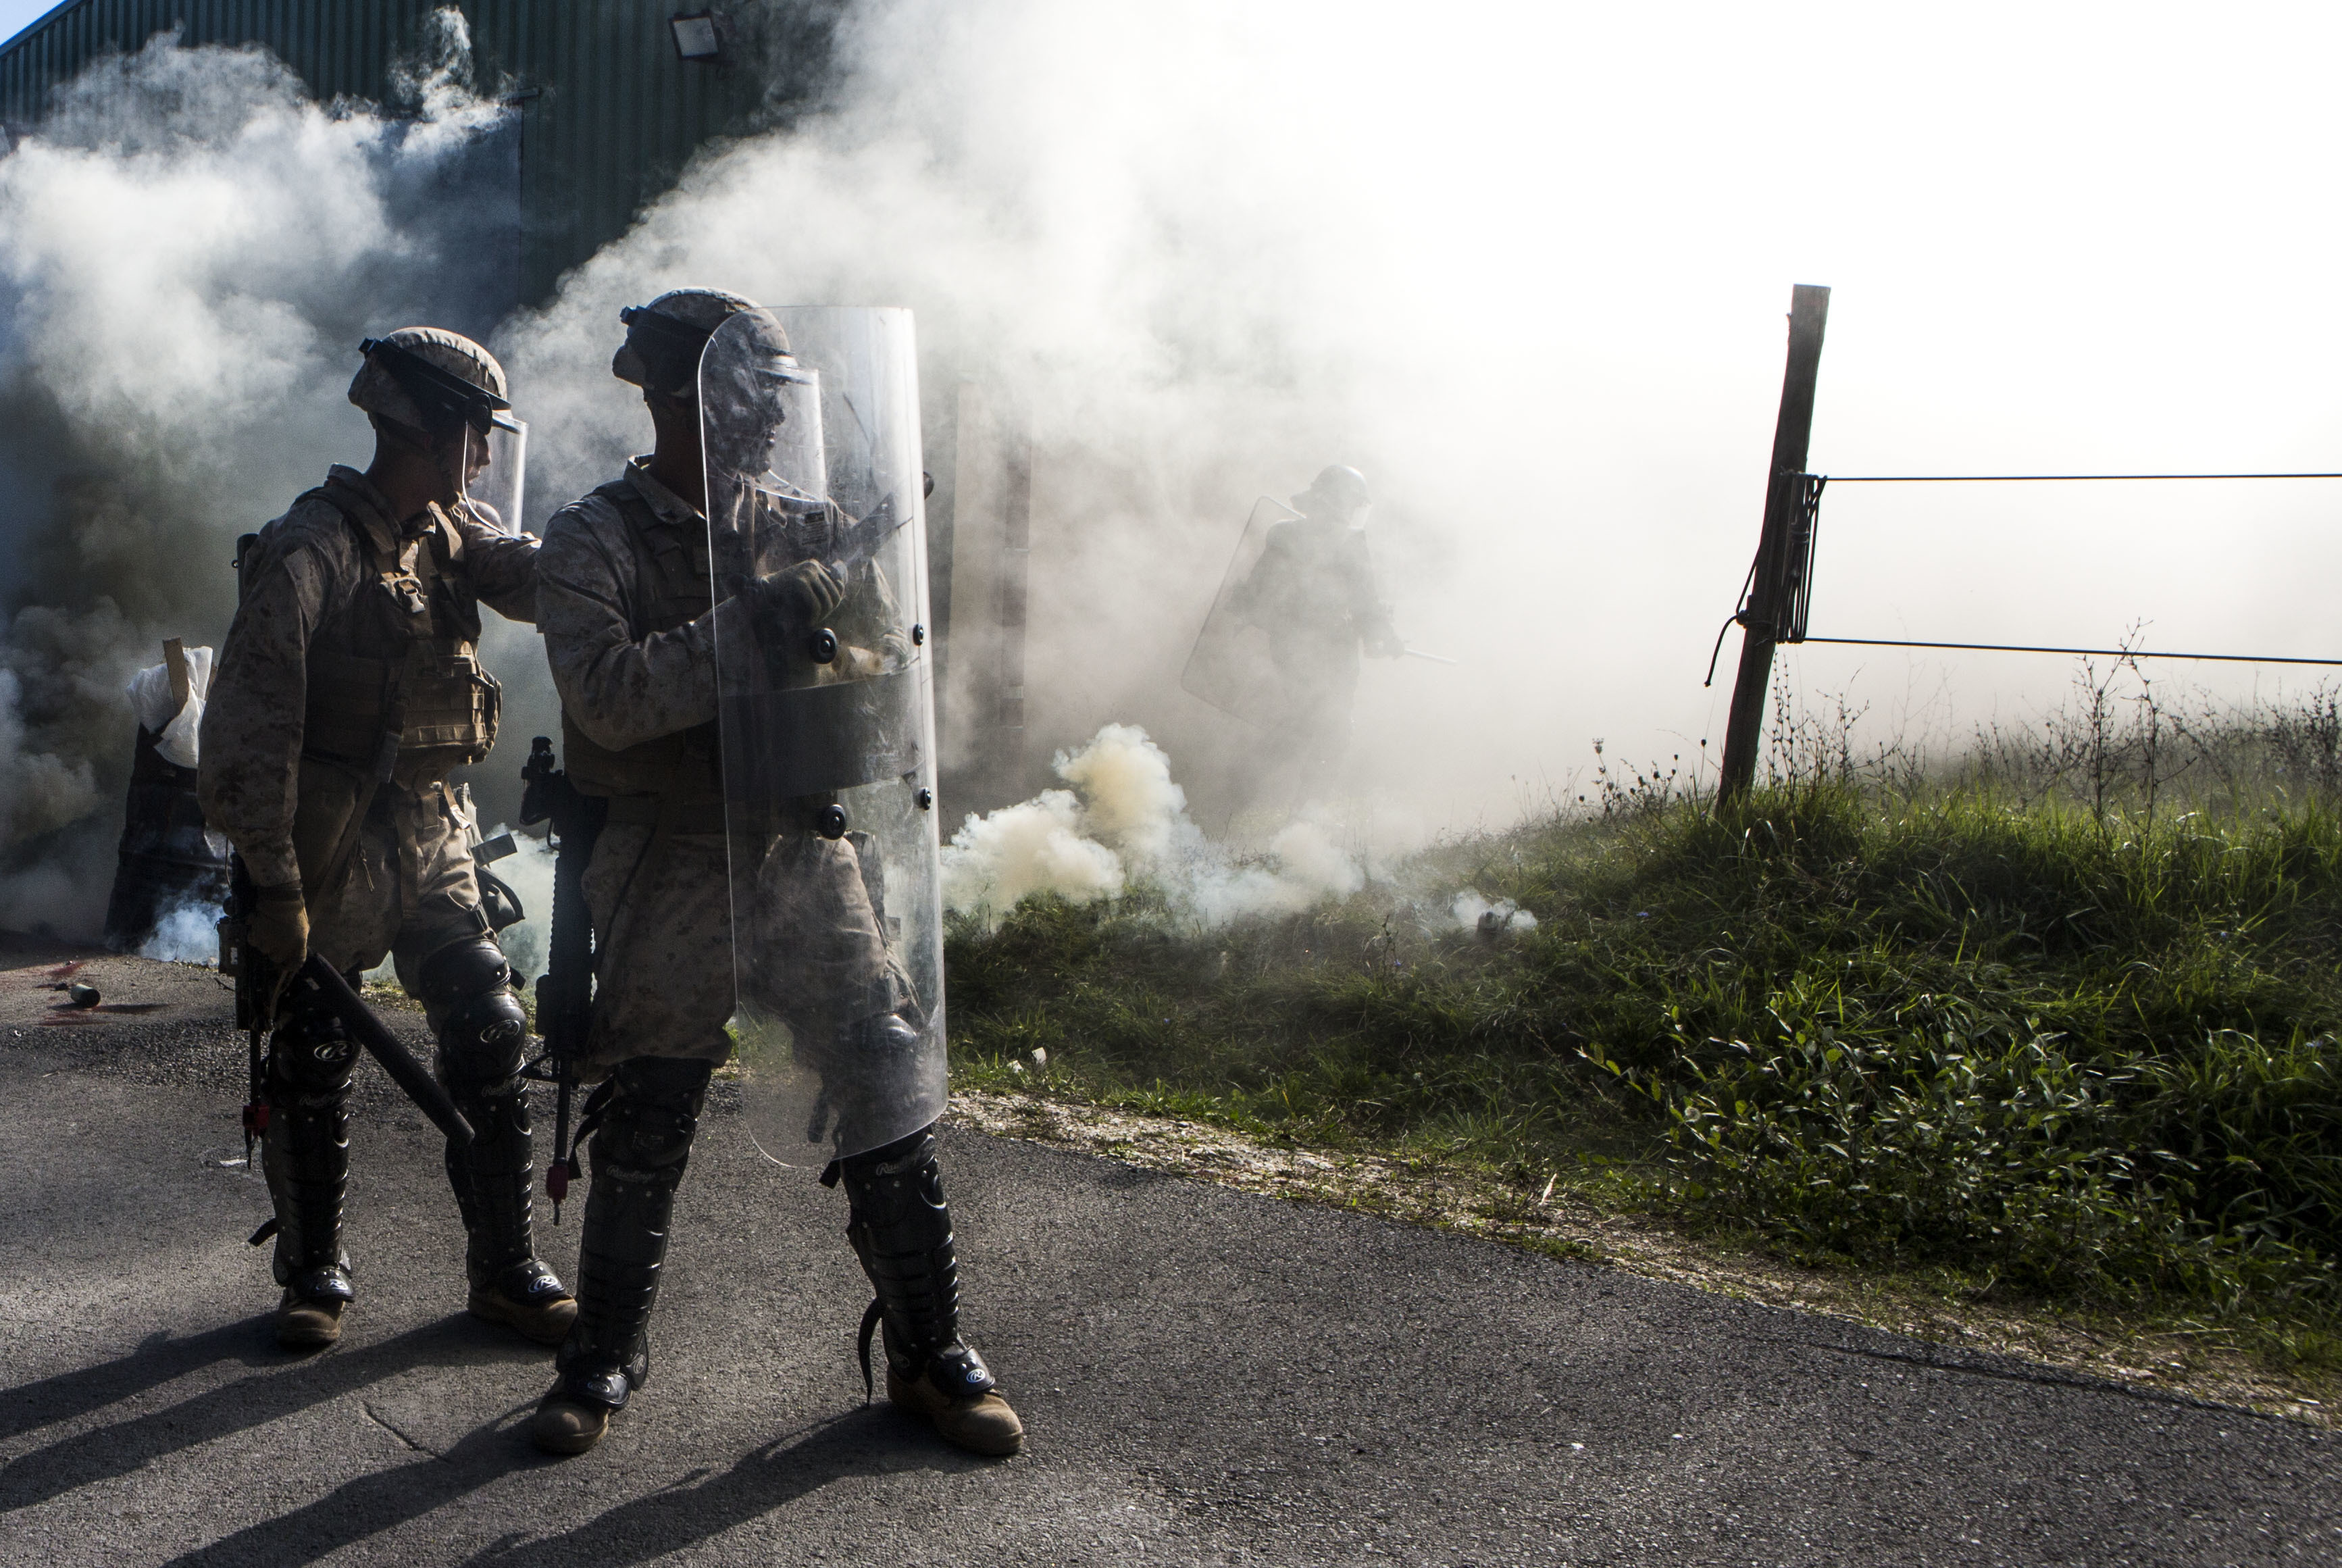 U.S. Marines stand guard during a simulated civilian evacuation at the National Gendarmerie Tactical Training Center in Saint-Astier, France, Oct. 9, 2015. The exercise marks the third rotation of Special-Purpose Marine Air-Ground Task Force Crisis Response-Africa Marines training alongside the Gendarmerie. US Marine Corps photo.